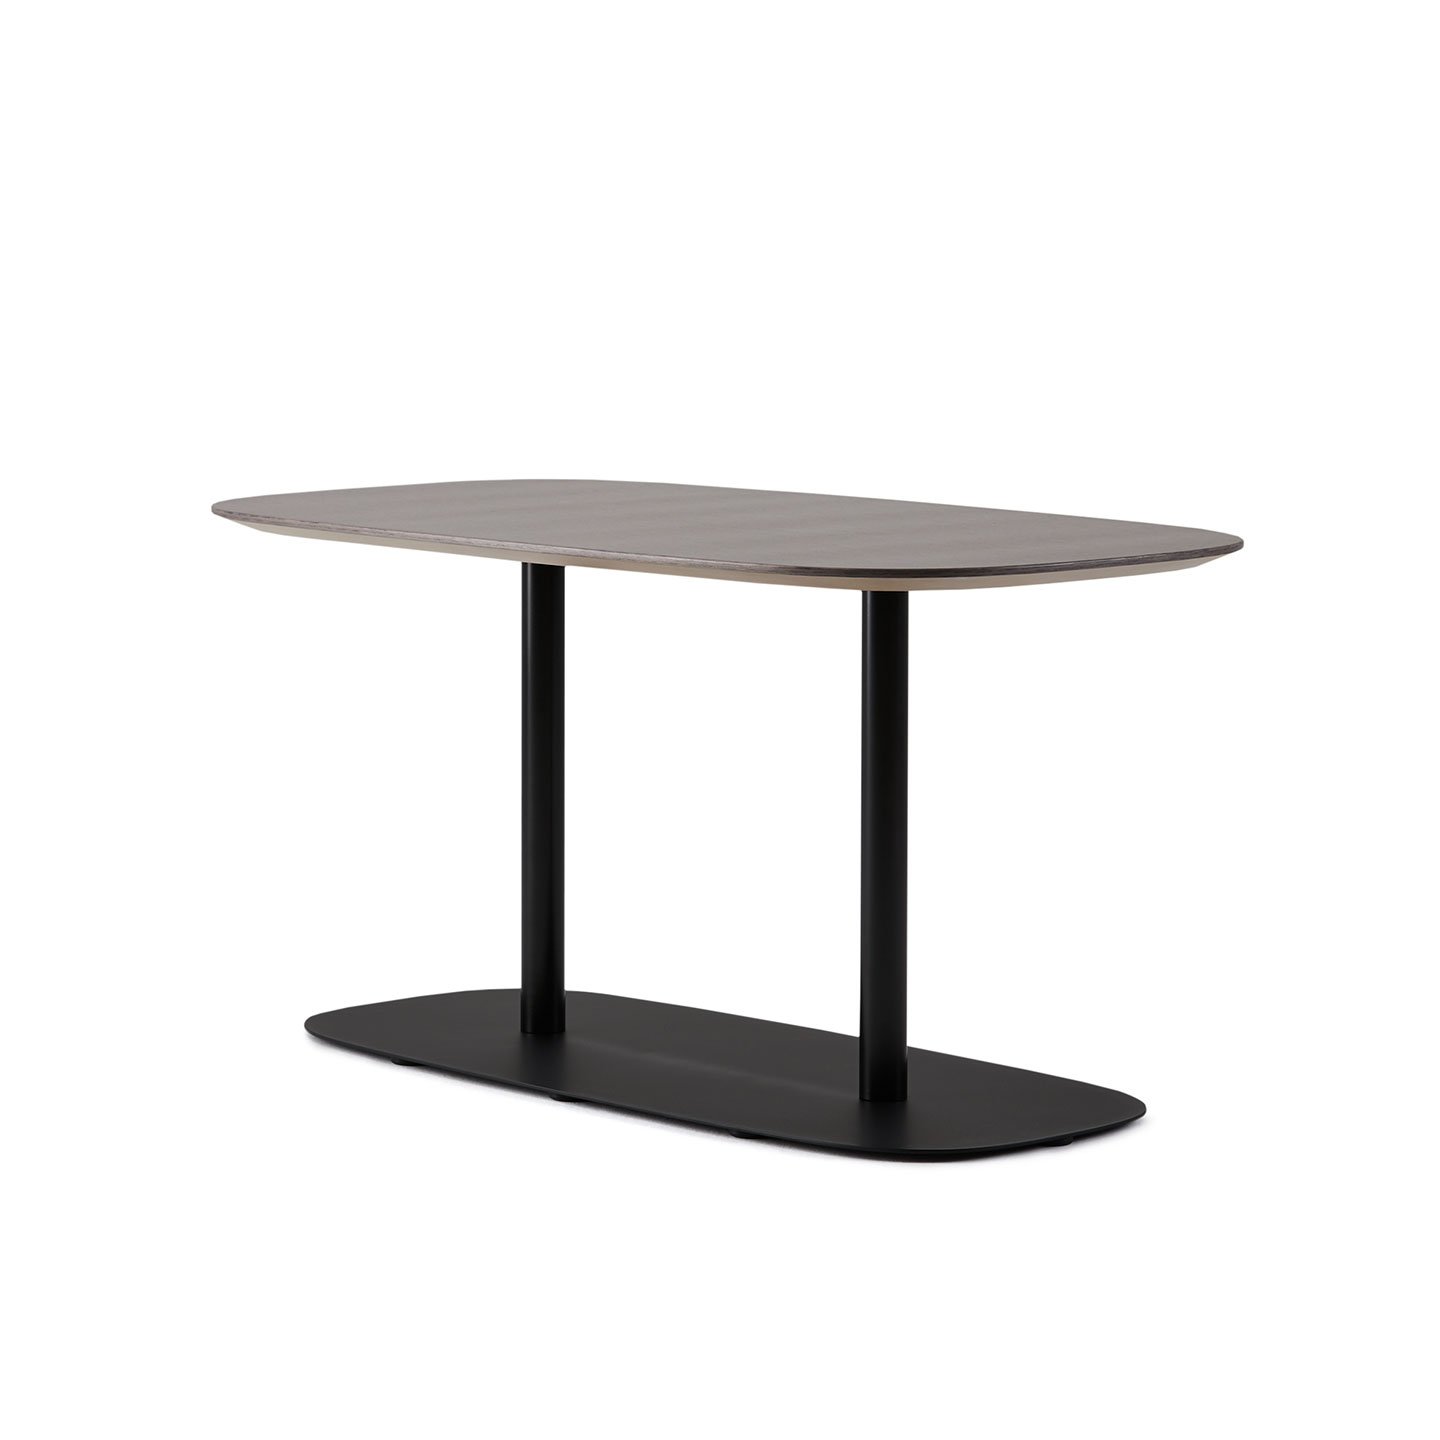 Haworth Pip Collaborative Table in grey with black base